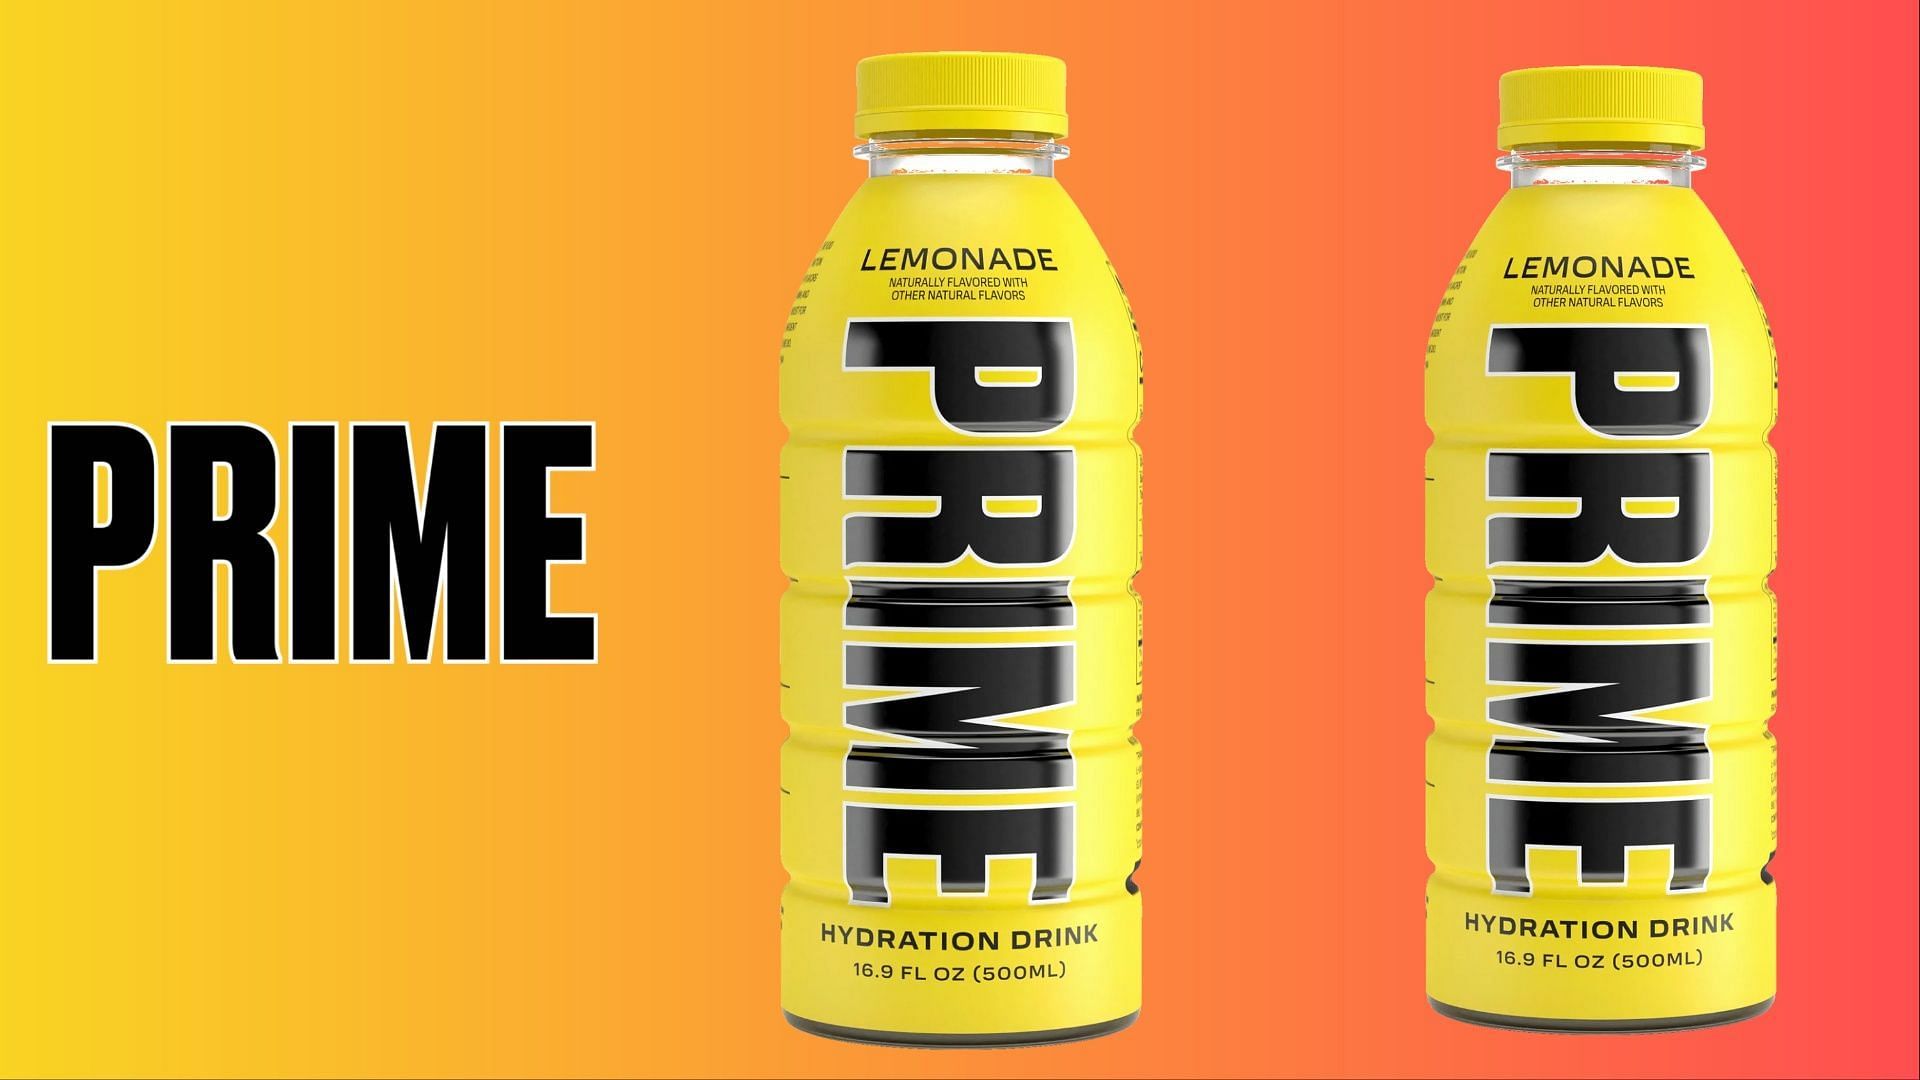 Lemonade Prime: Where to Buy, release date, price, and all you